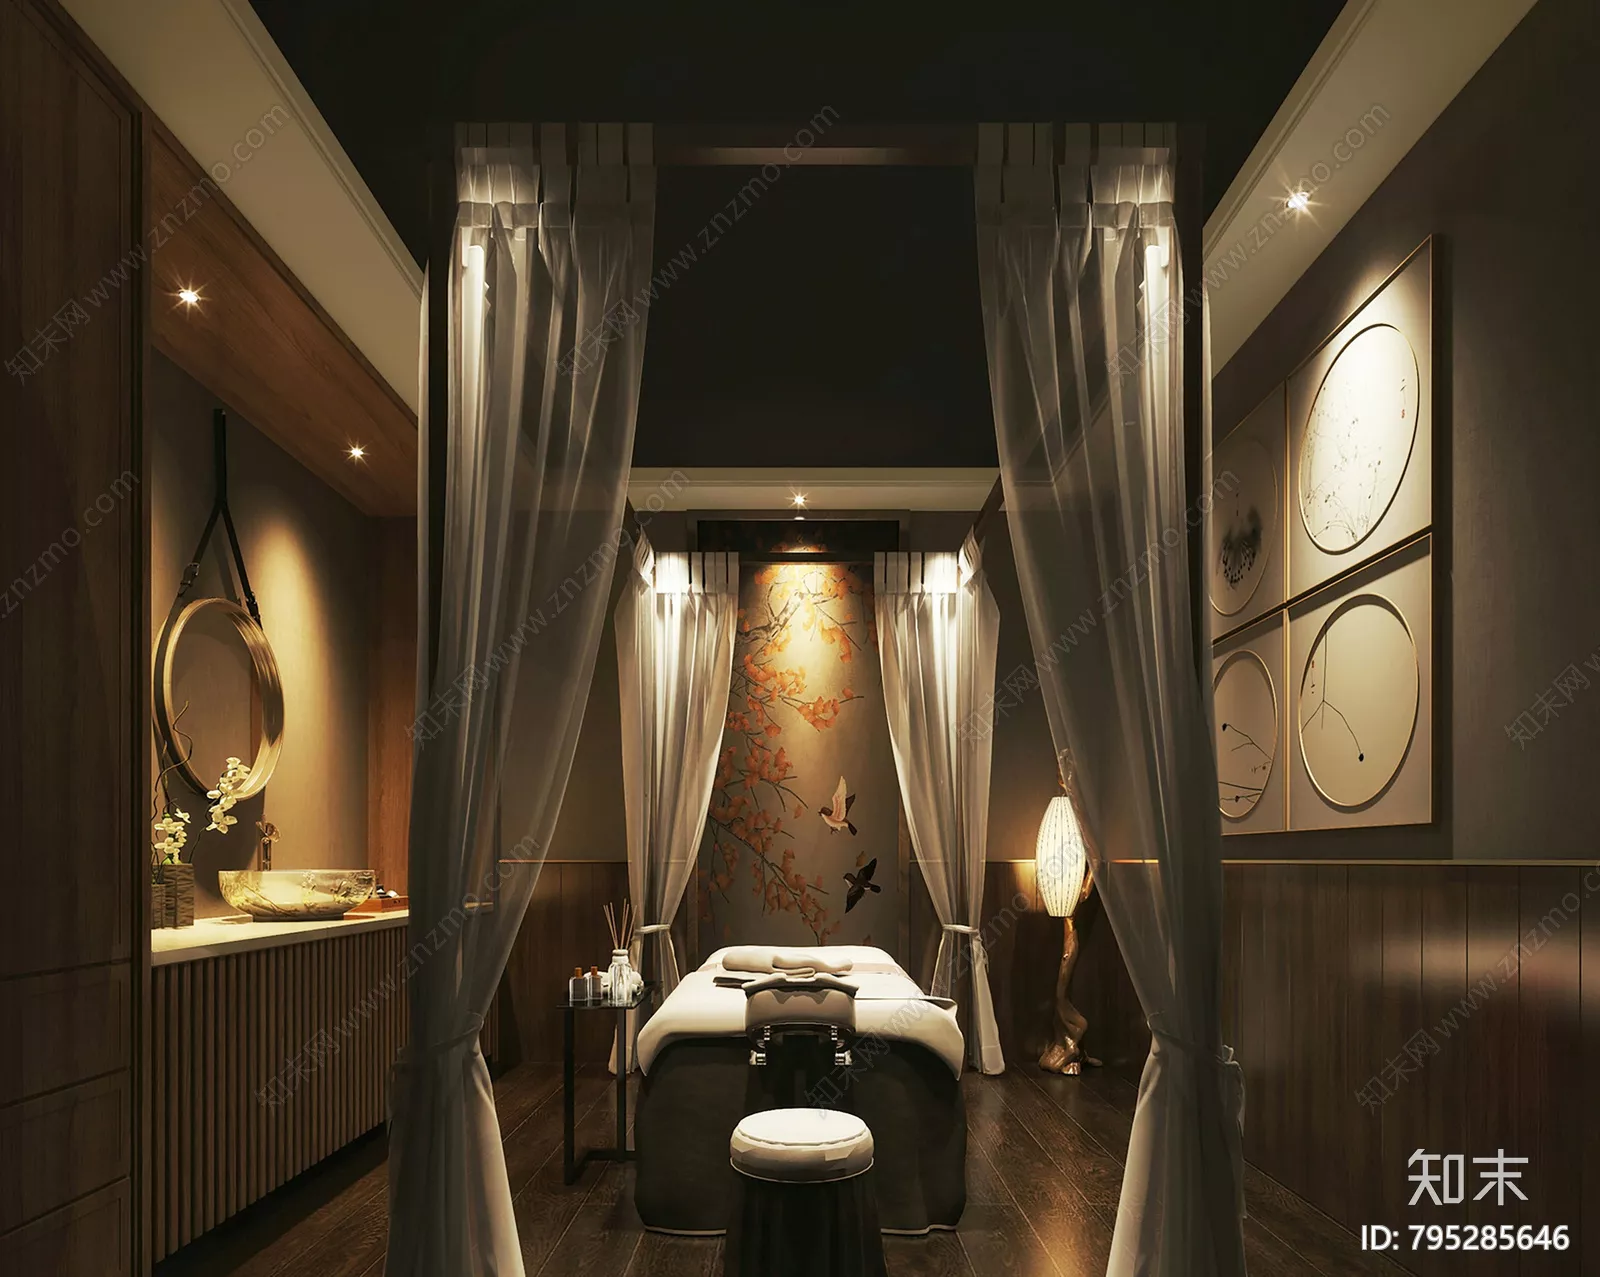 MODERN SPA AND BEAUTY - SKETCHUP 3D SCENE - VRAY OR ENSCAPE - ID14043